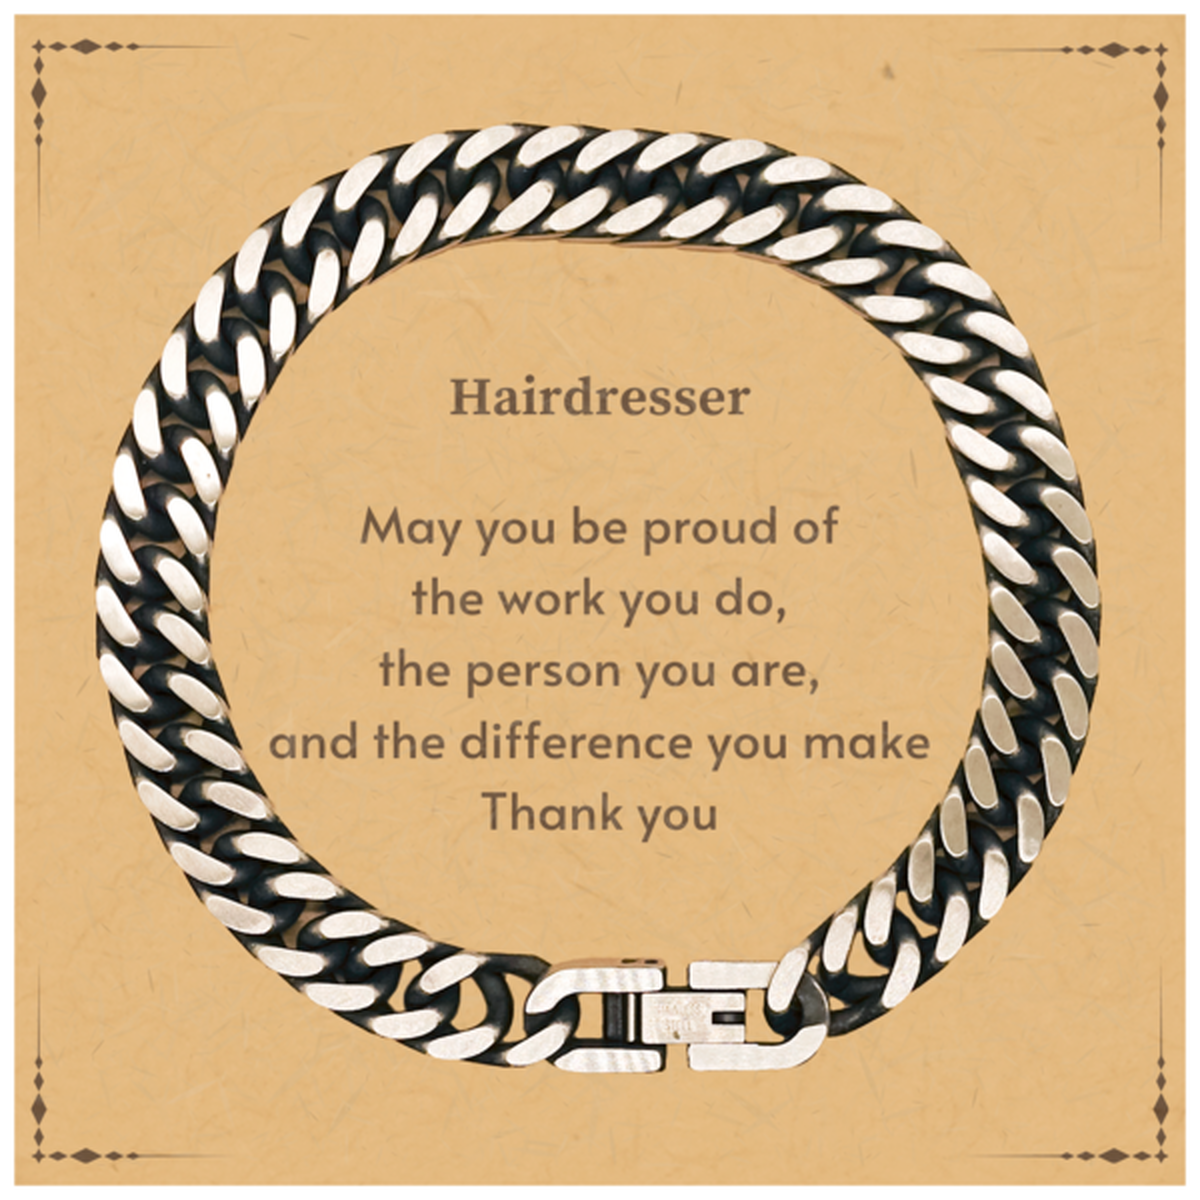 Heartwarming Cuban Link Chain Bracelet Retirement Coworkers Gifts for Hairdresser, Hairdresser May You be proud of the work you do, the person you are Gifts for Boss Men Women Friends